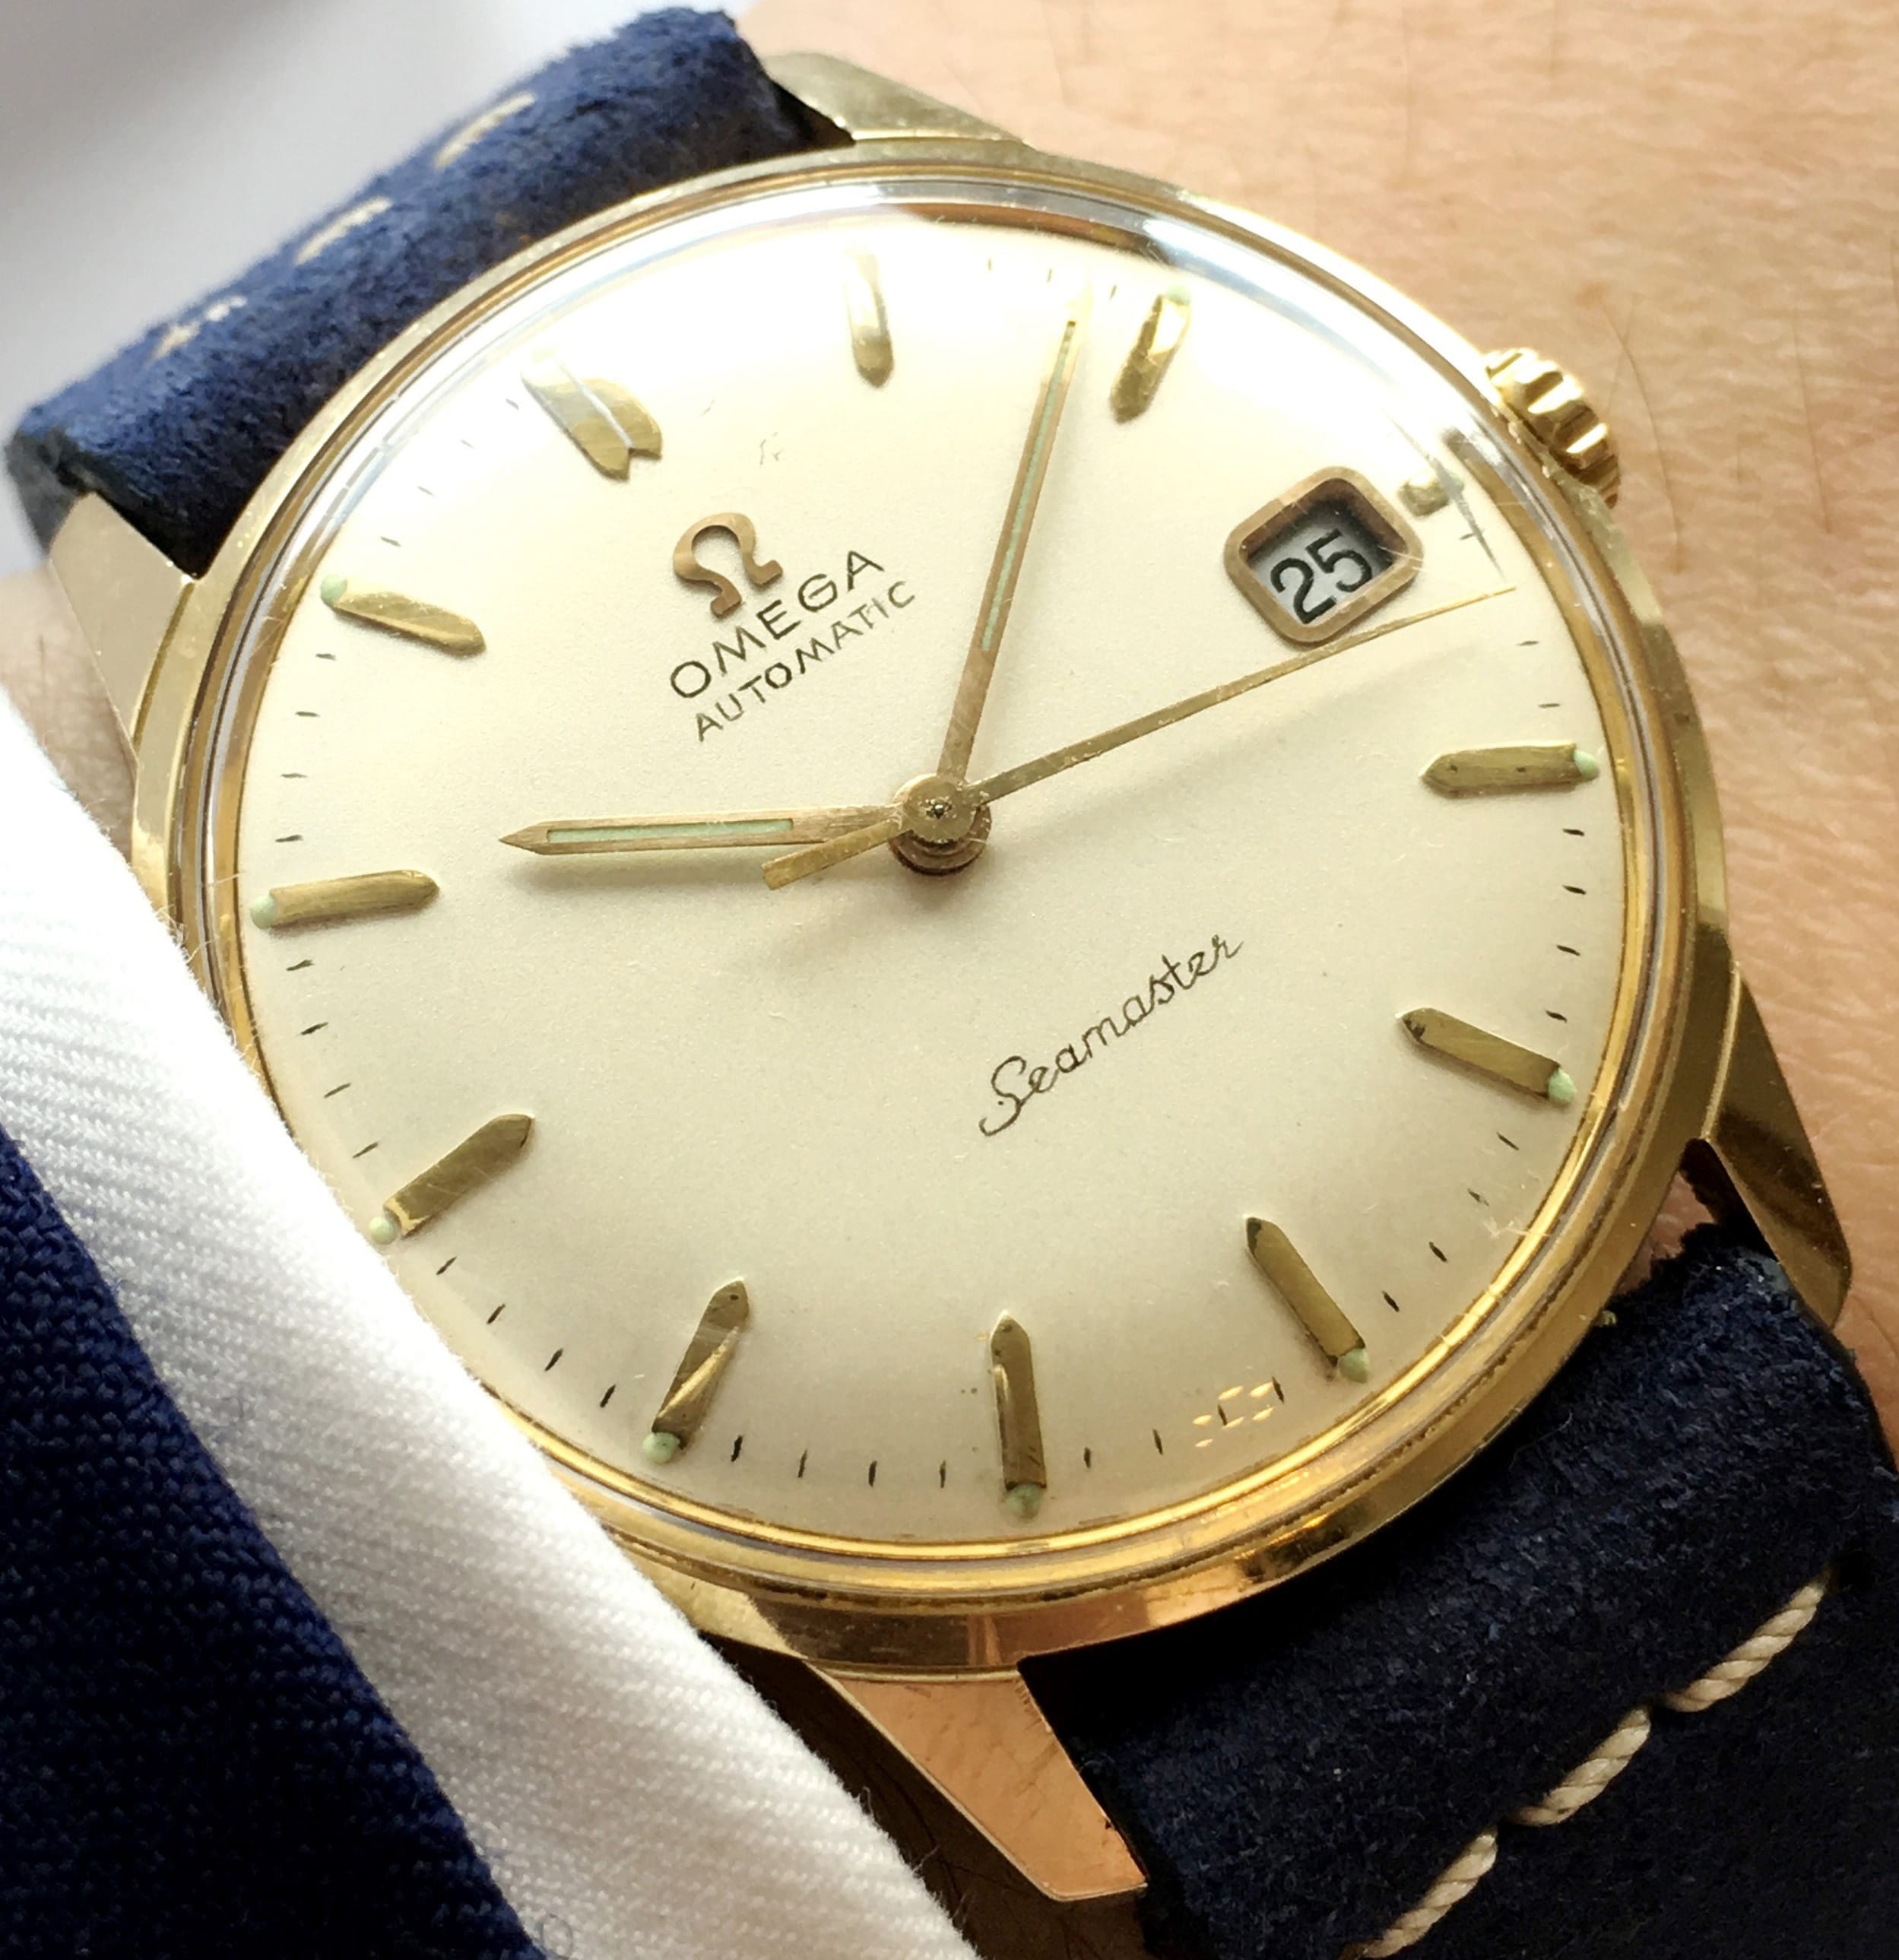 Omega gold watch value